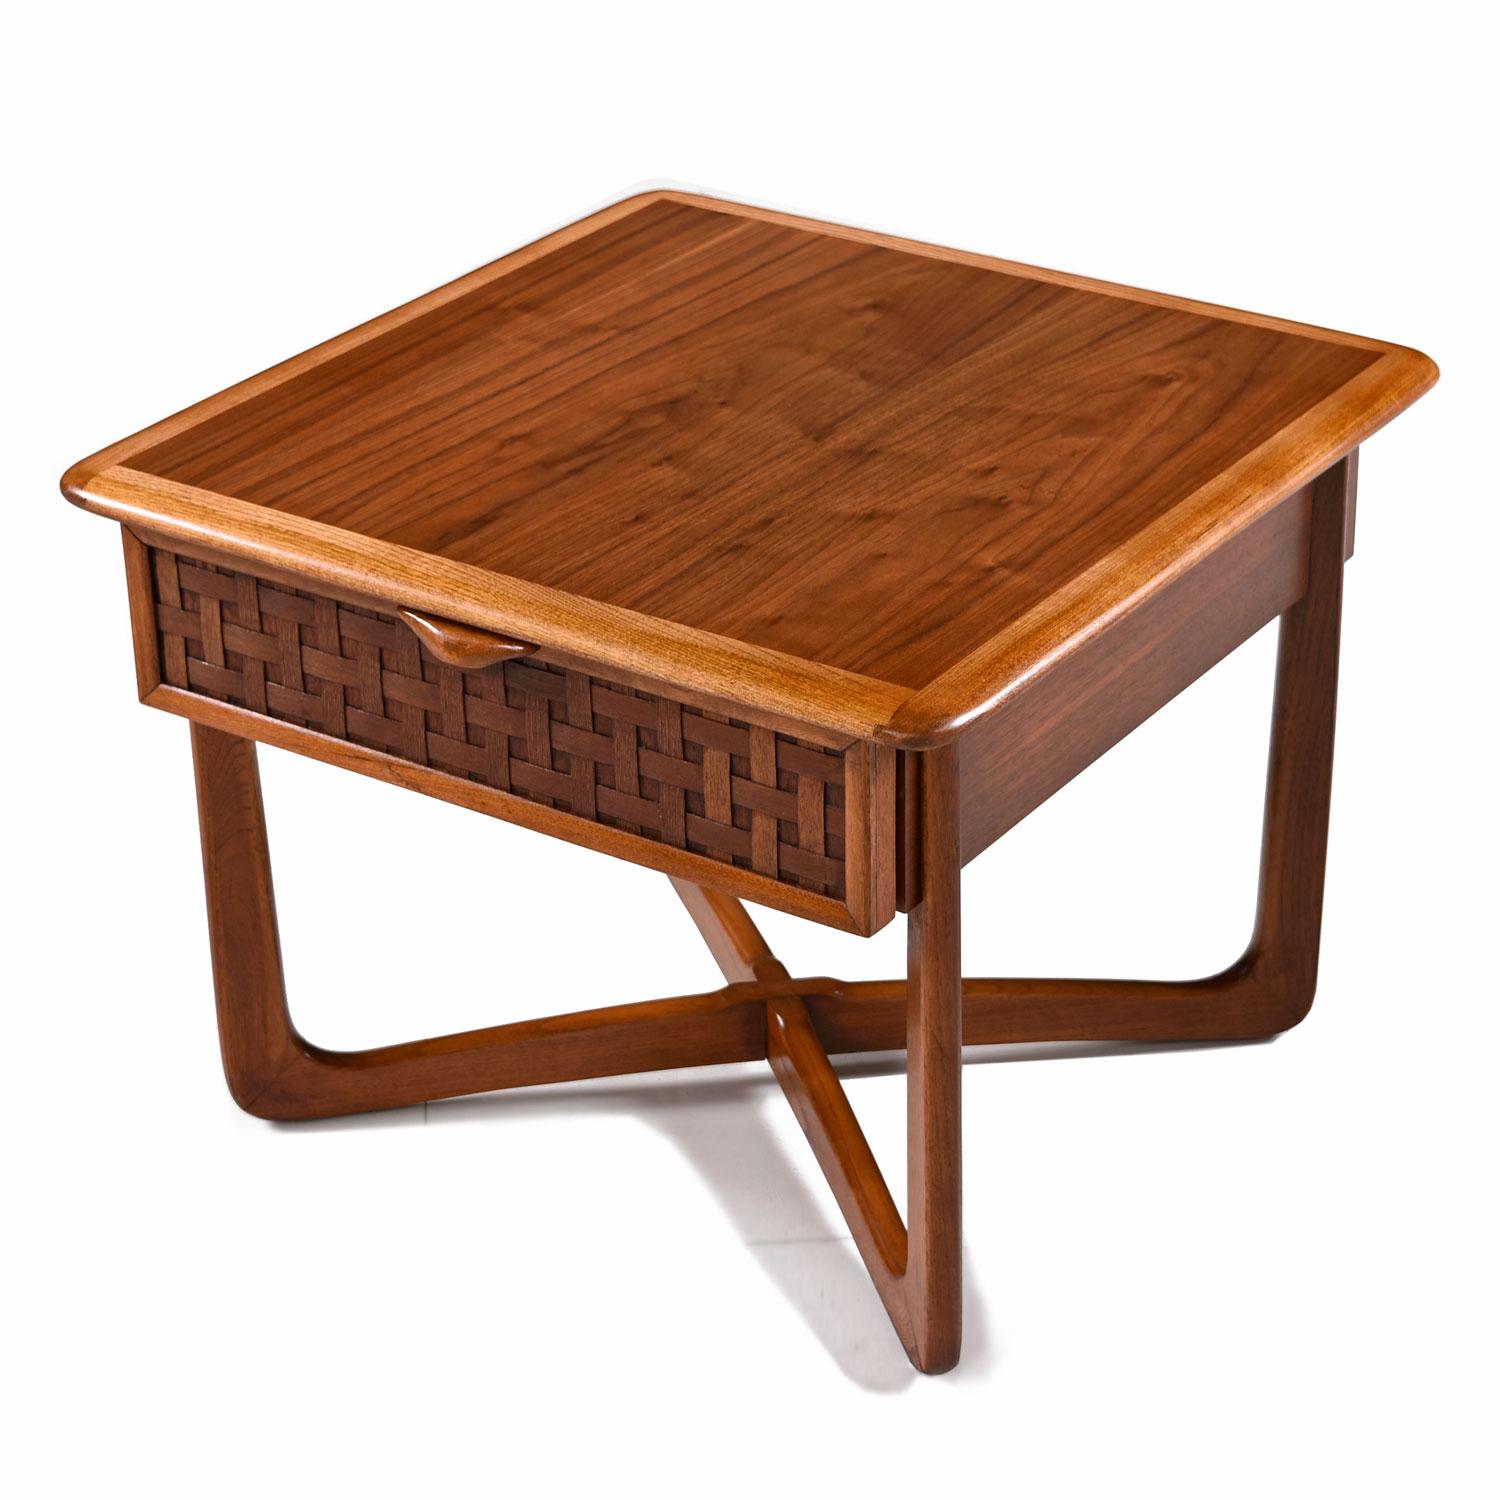 (2) available, each sold separately. Mid-Century Modern Lane Perception lamp table. Quality American construction paired with Fine design. Top surface is walnut wood with contrasting oak trim tracing the perimeter. Elegant woven wood facade and